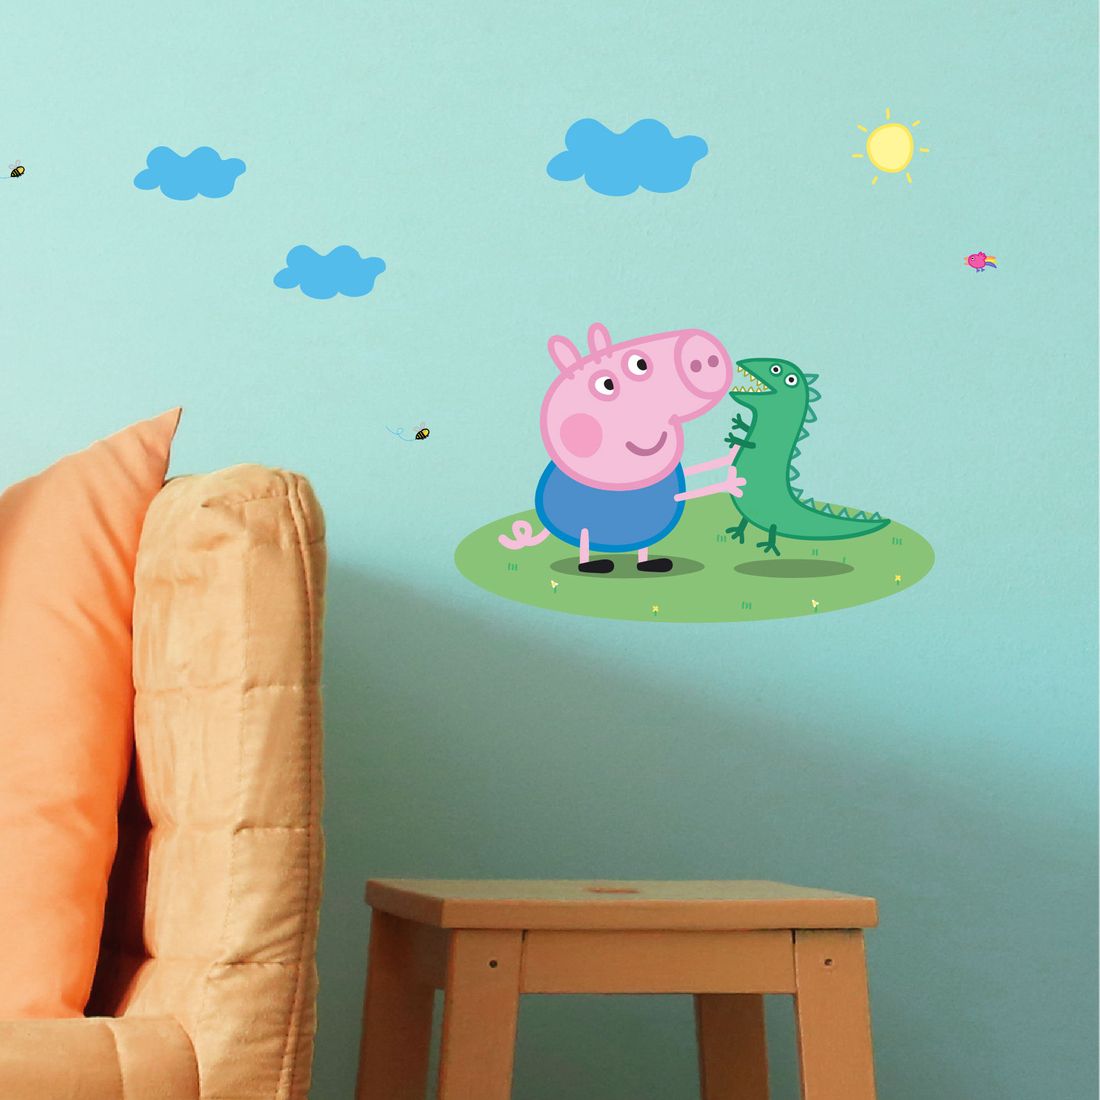 Asian Paints Wall Ons Peppa Pig Captain George With Mr Dinosaur Wall Sticker